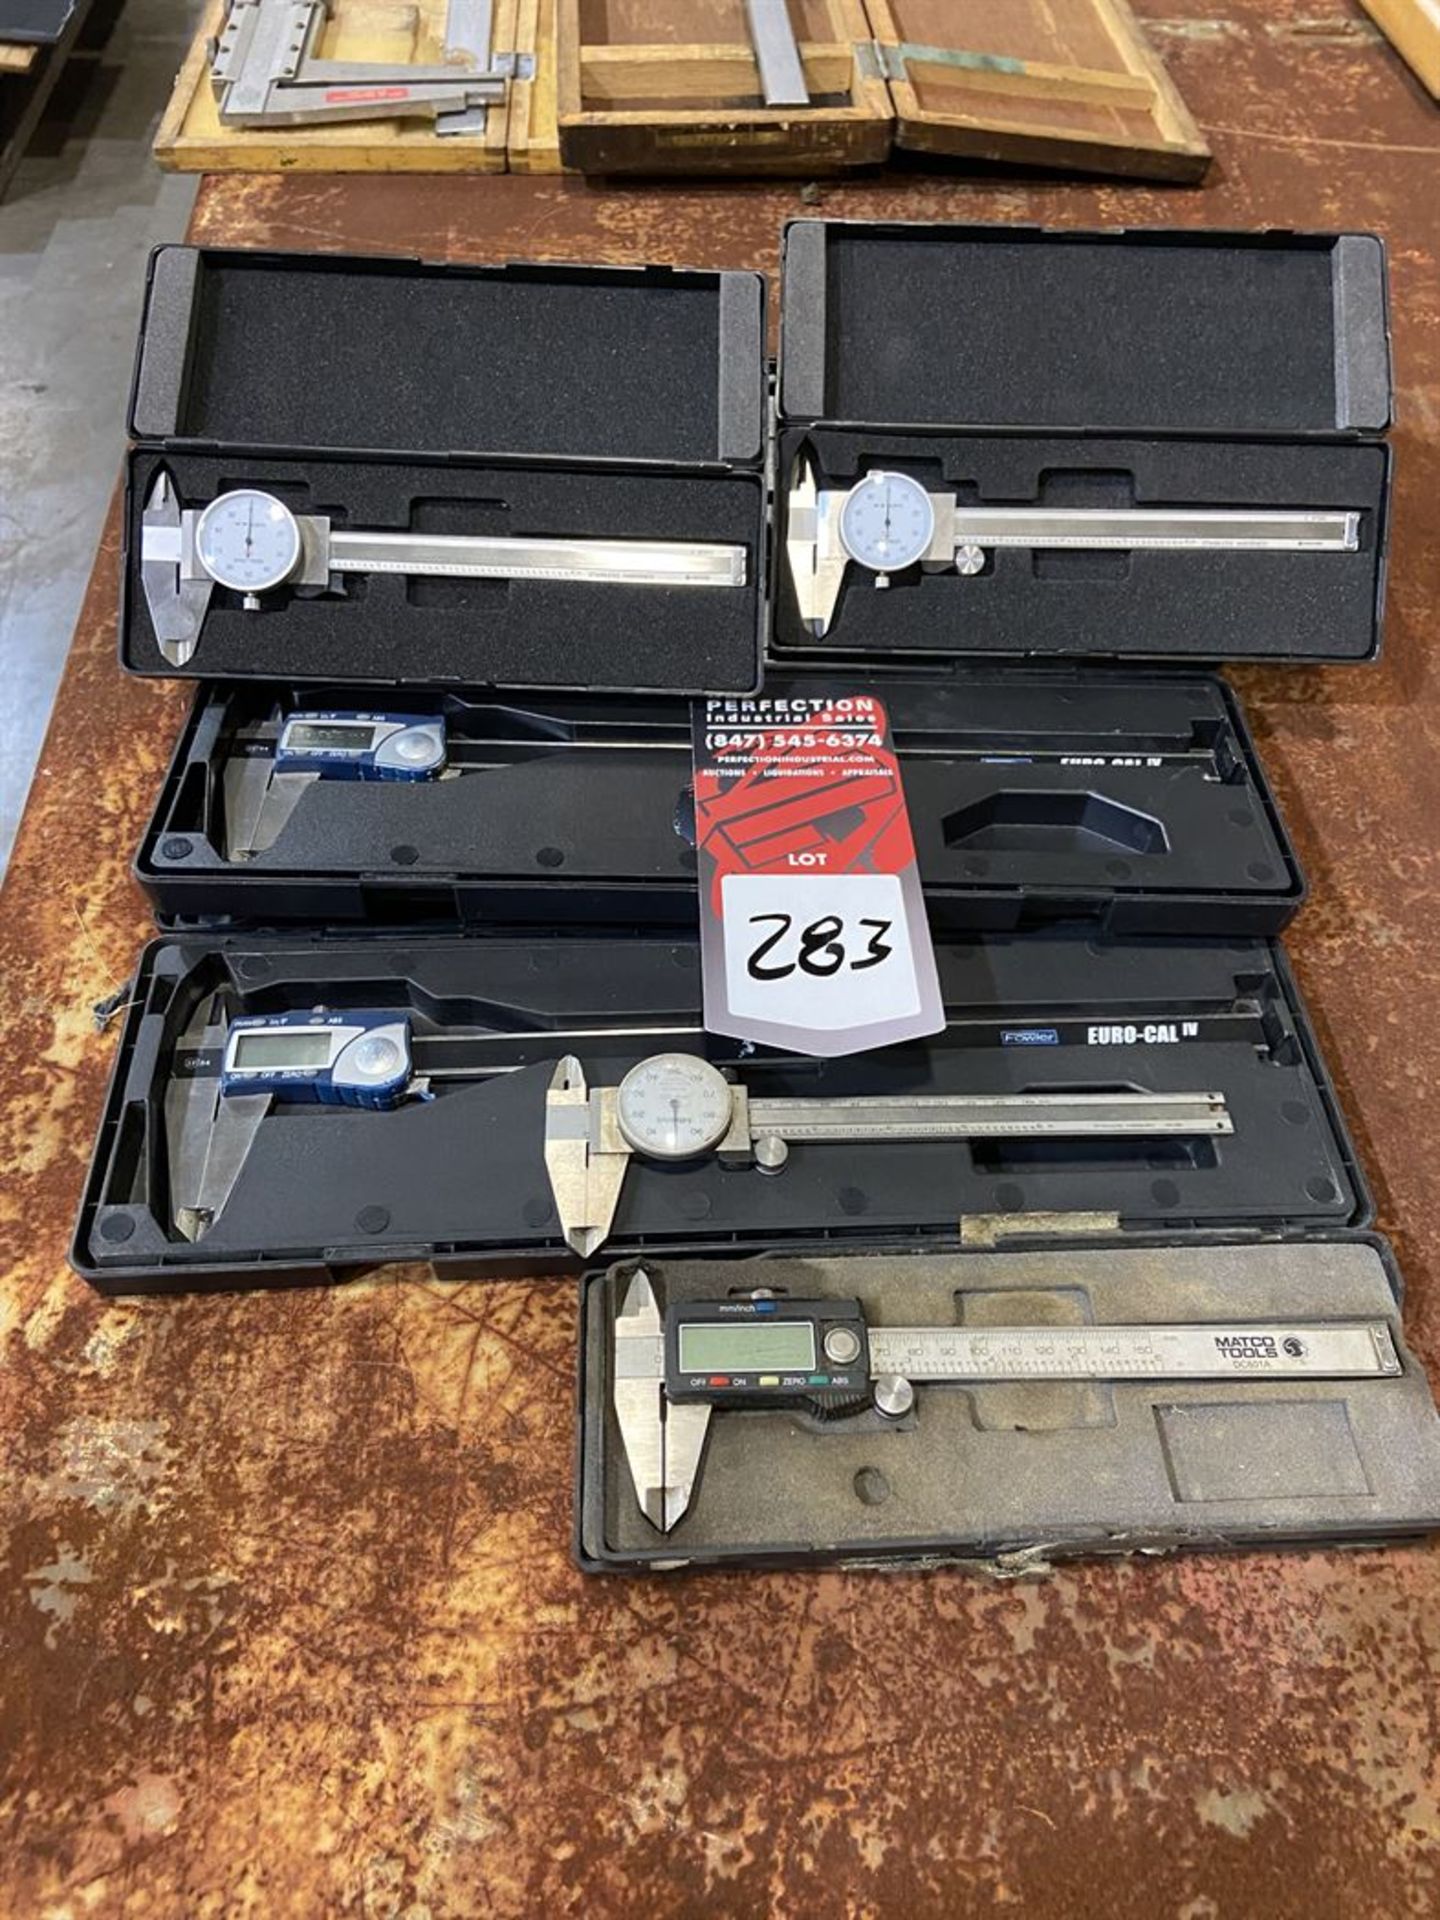 Lot of (6) Calipers, Fowler, Mitutoyo and Misc